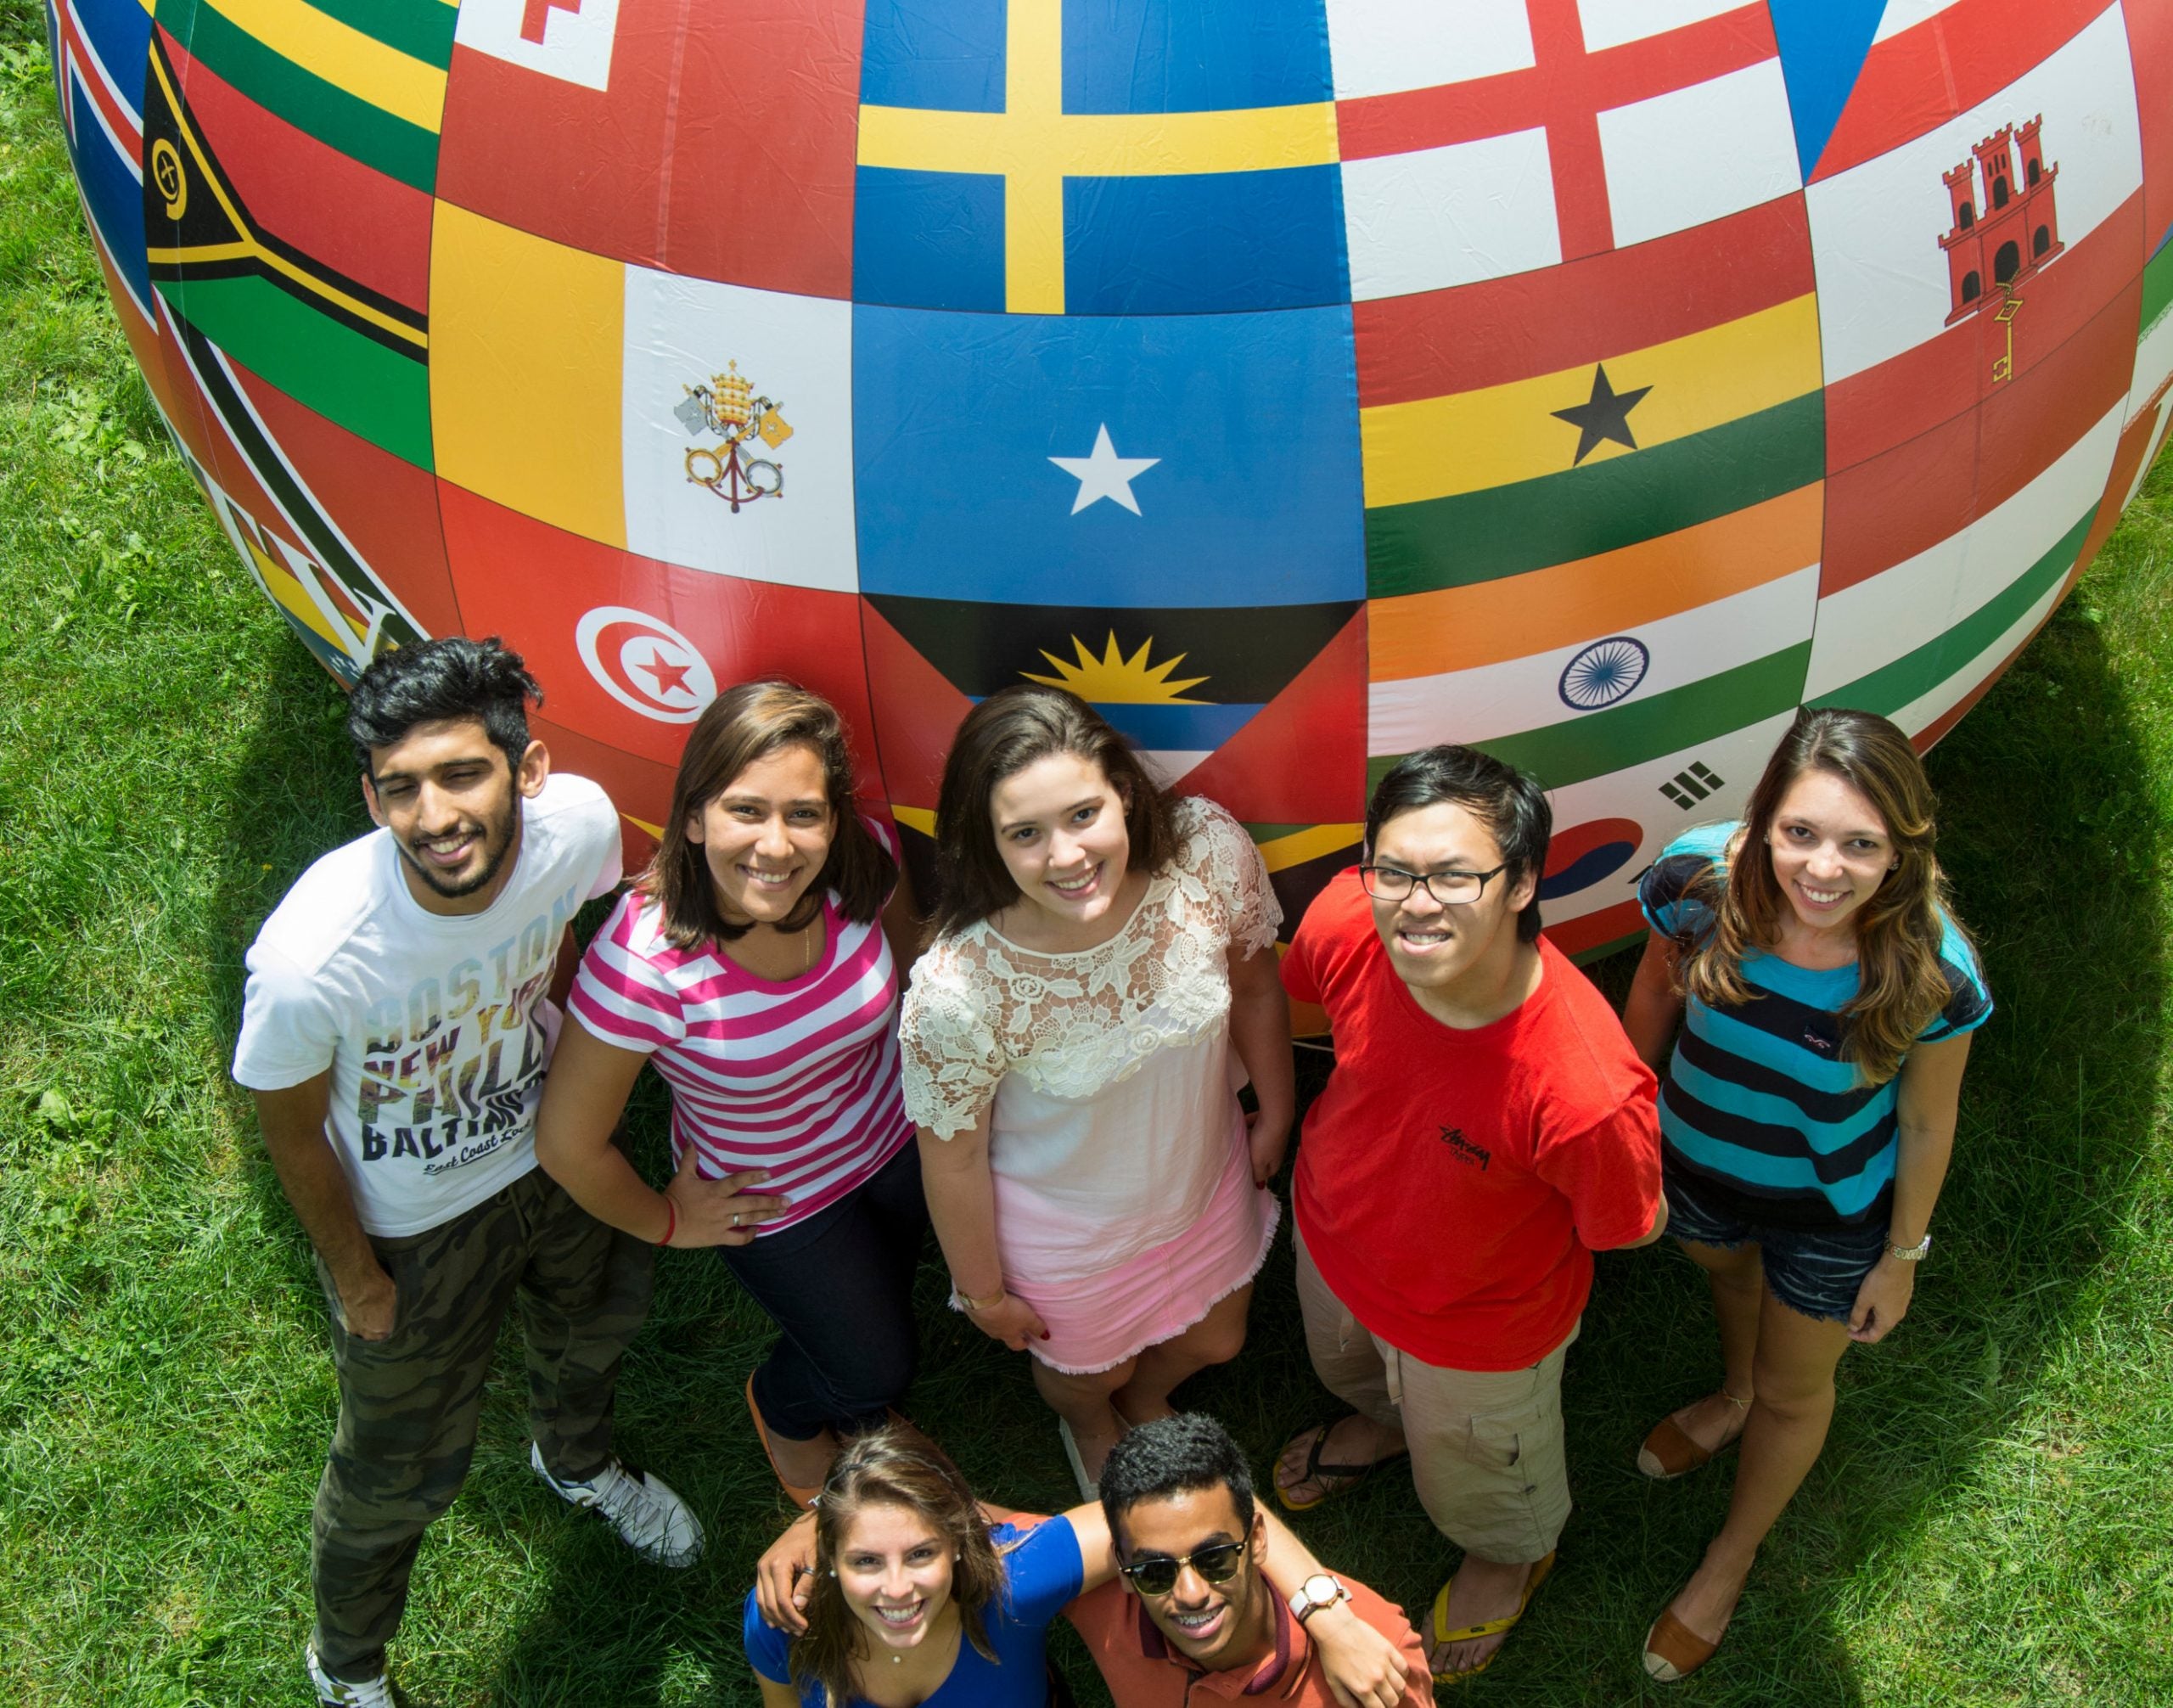 A group of students next to a giant ball decorated with international flags.